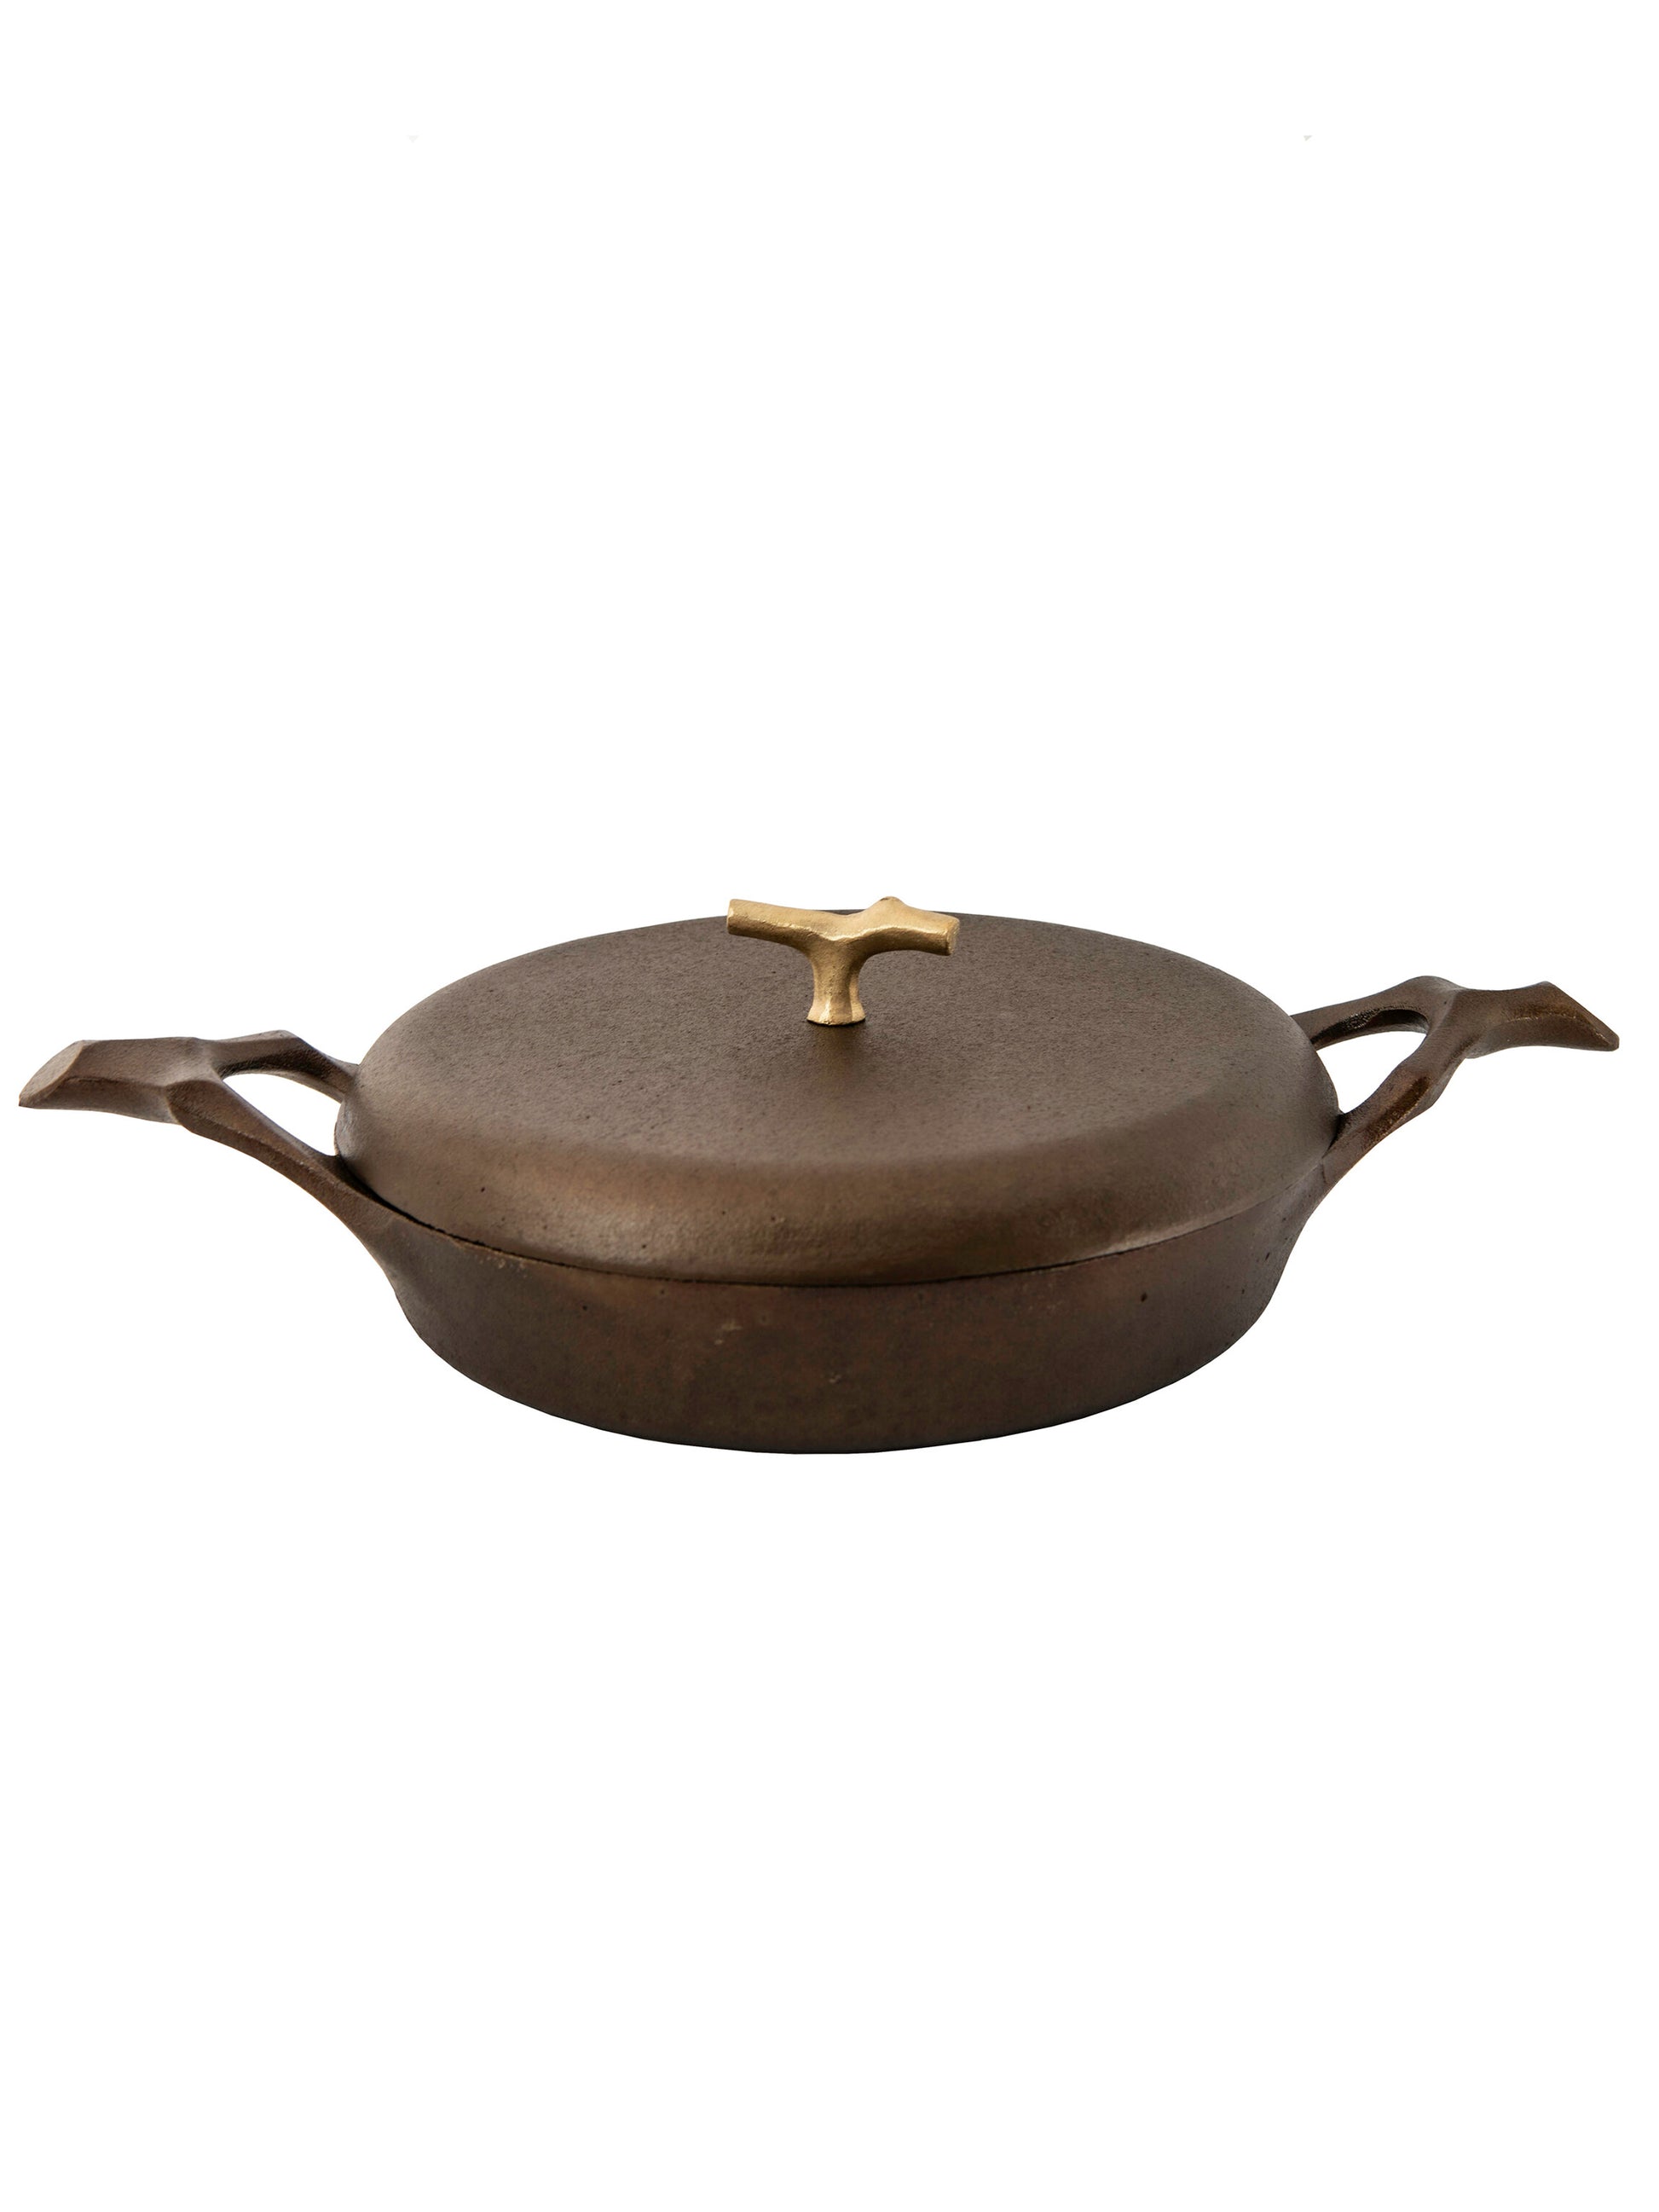 Shop the Smithey Cast-Iron Double-Handled Skillet at Weston Table